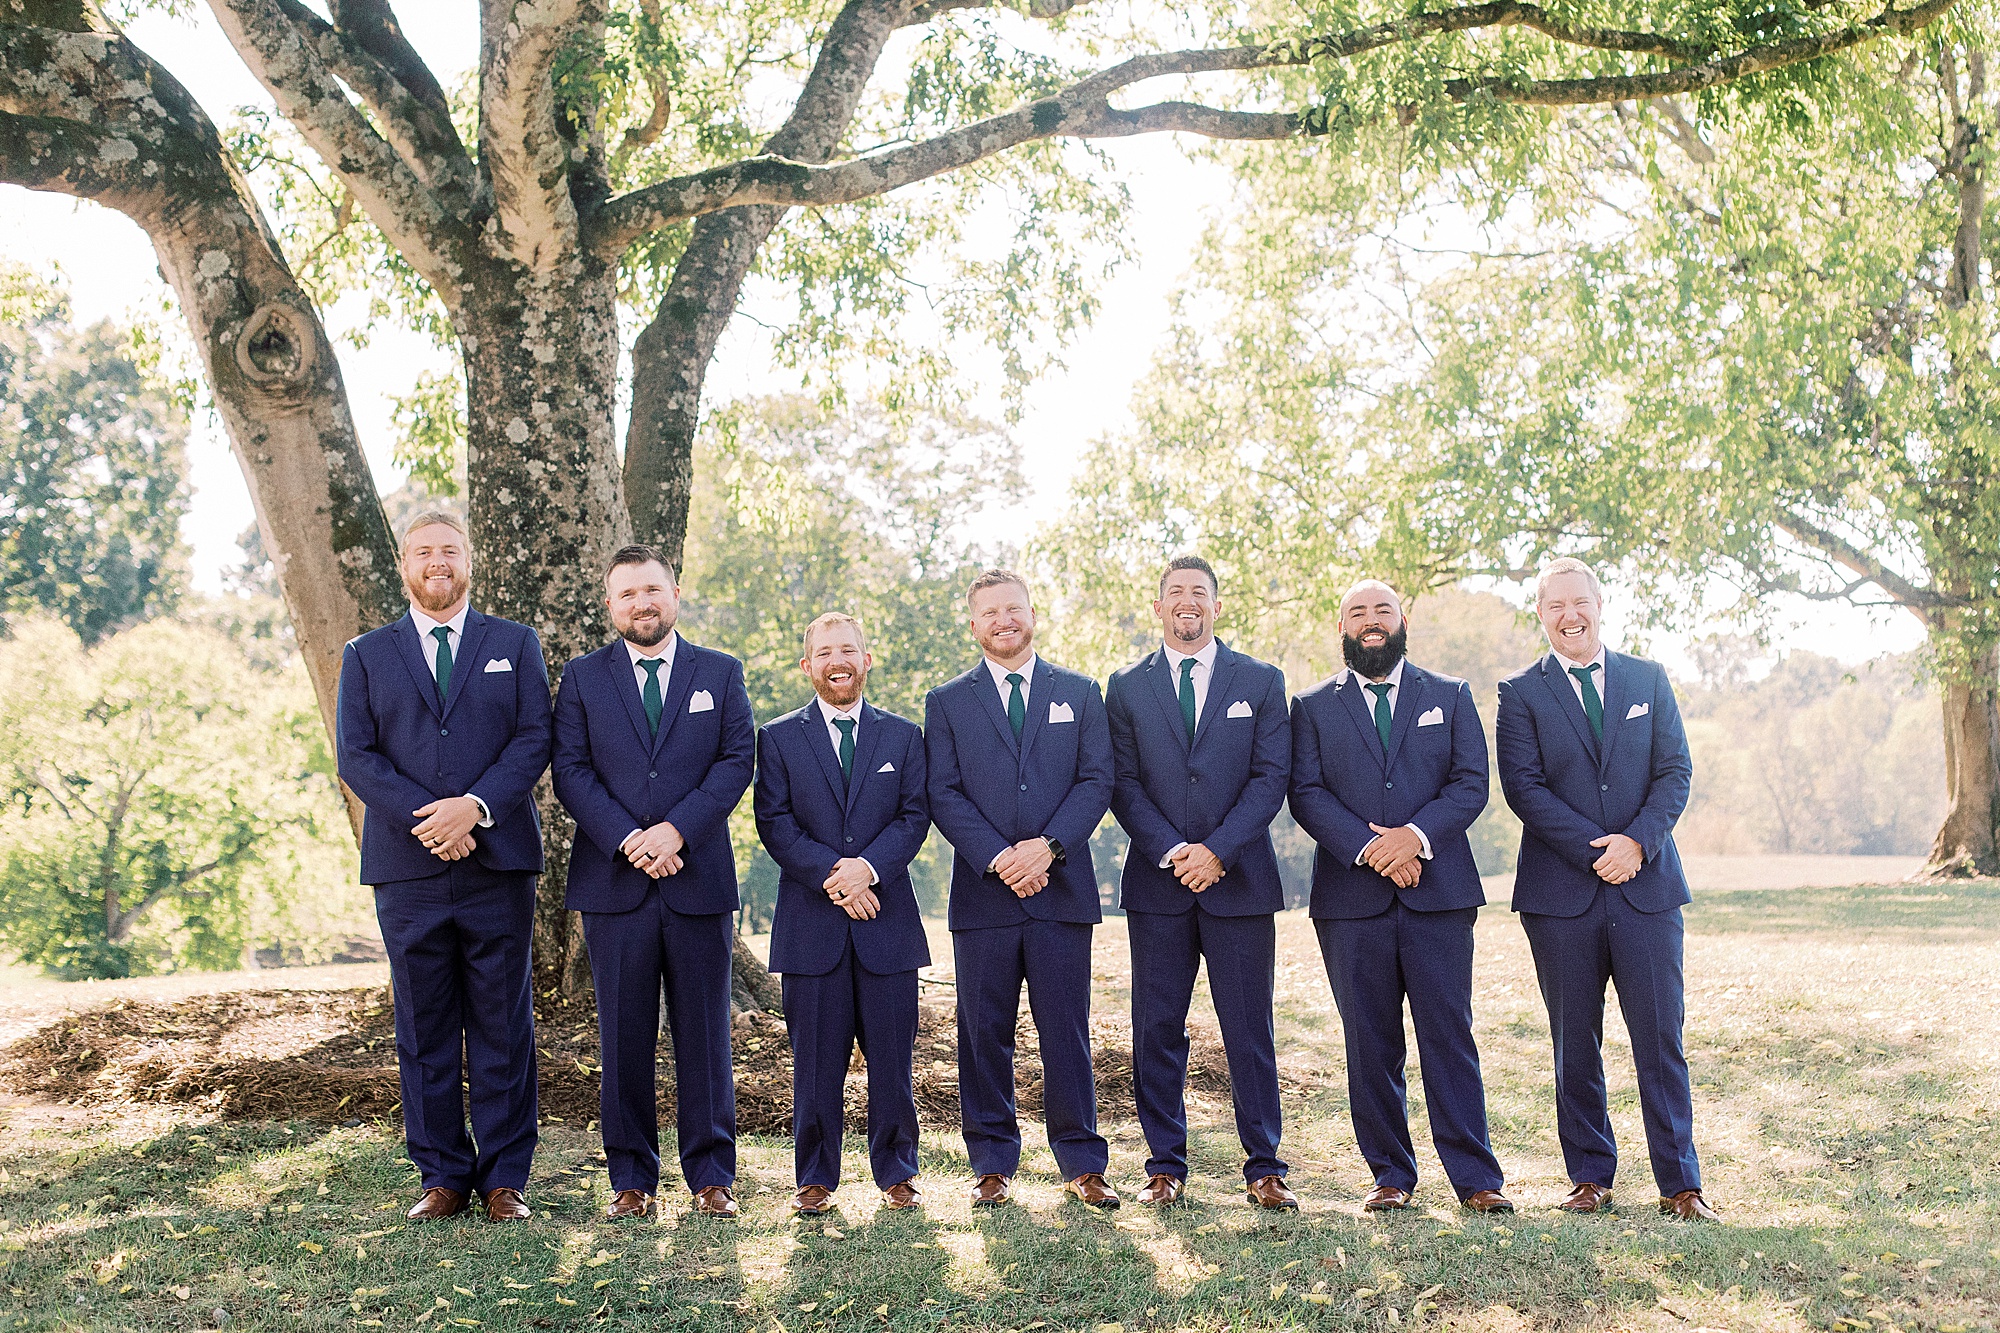 groom stand with groomsmen in navy suits